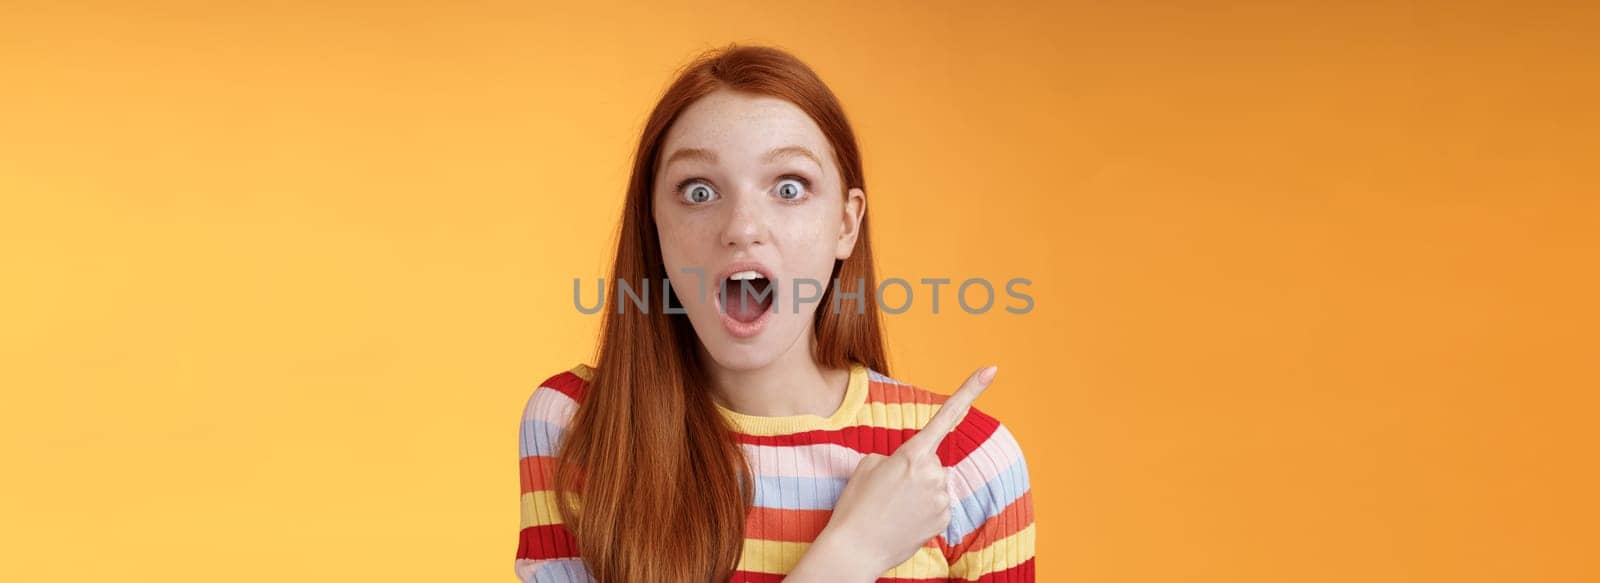 Impressed speechless young redhead 20s girl drop jaw gasping amused wide eyes staring camera surprised see awesome stunning new product pointing left index finger questioned, orange background.